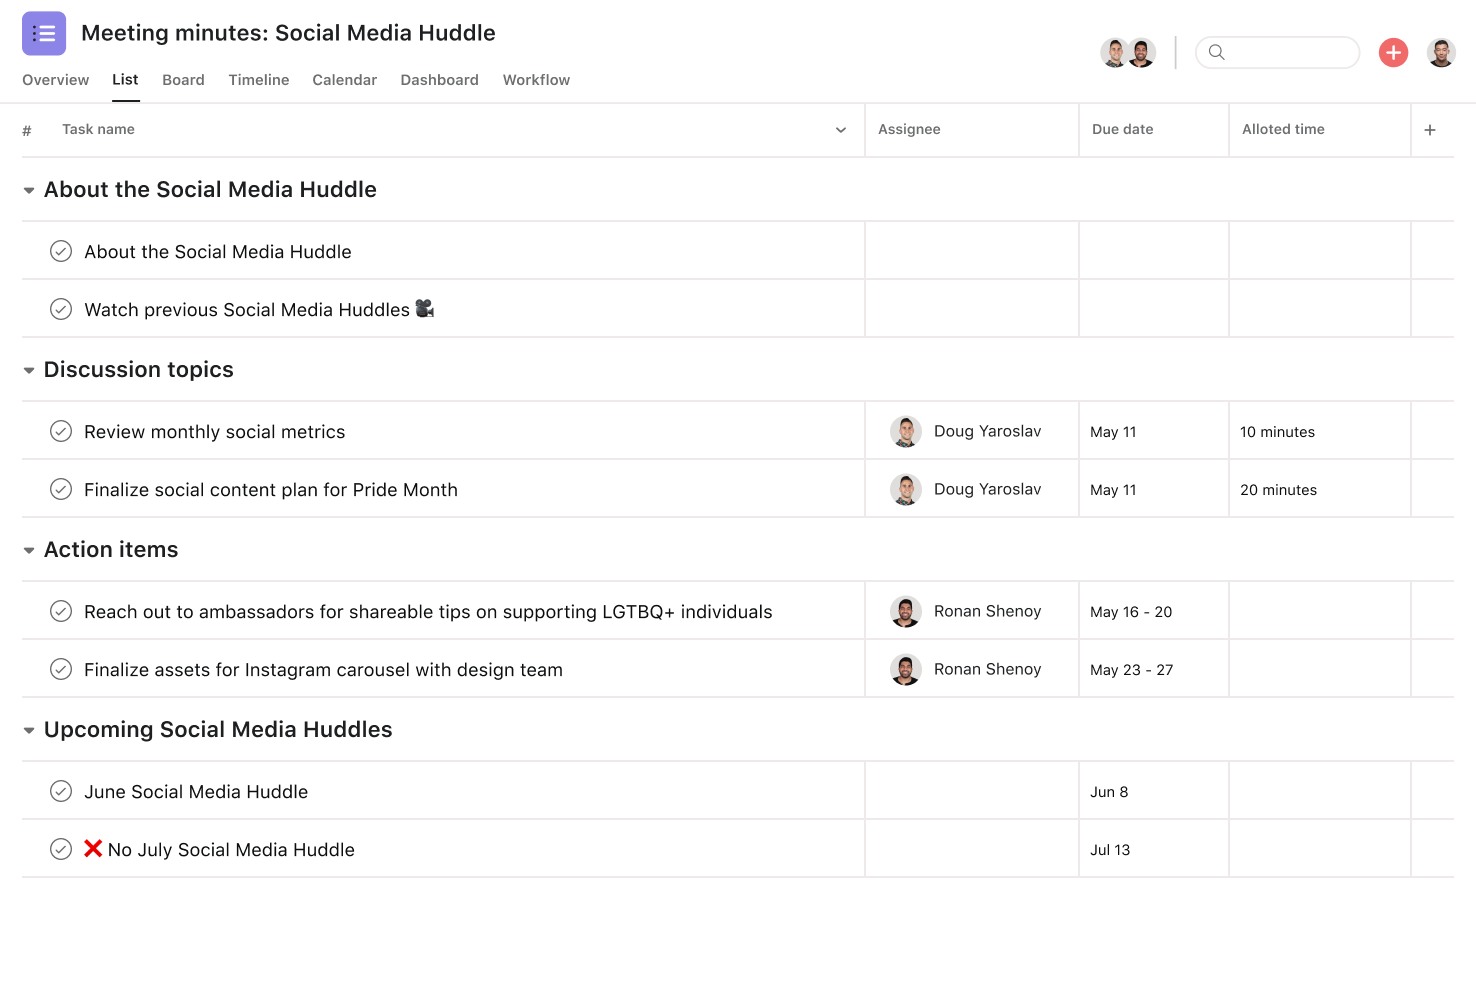 [Product ui] Meeting minutes project in Asana, spreadsheet-style project view (List)